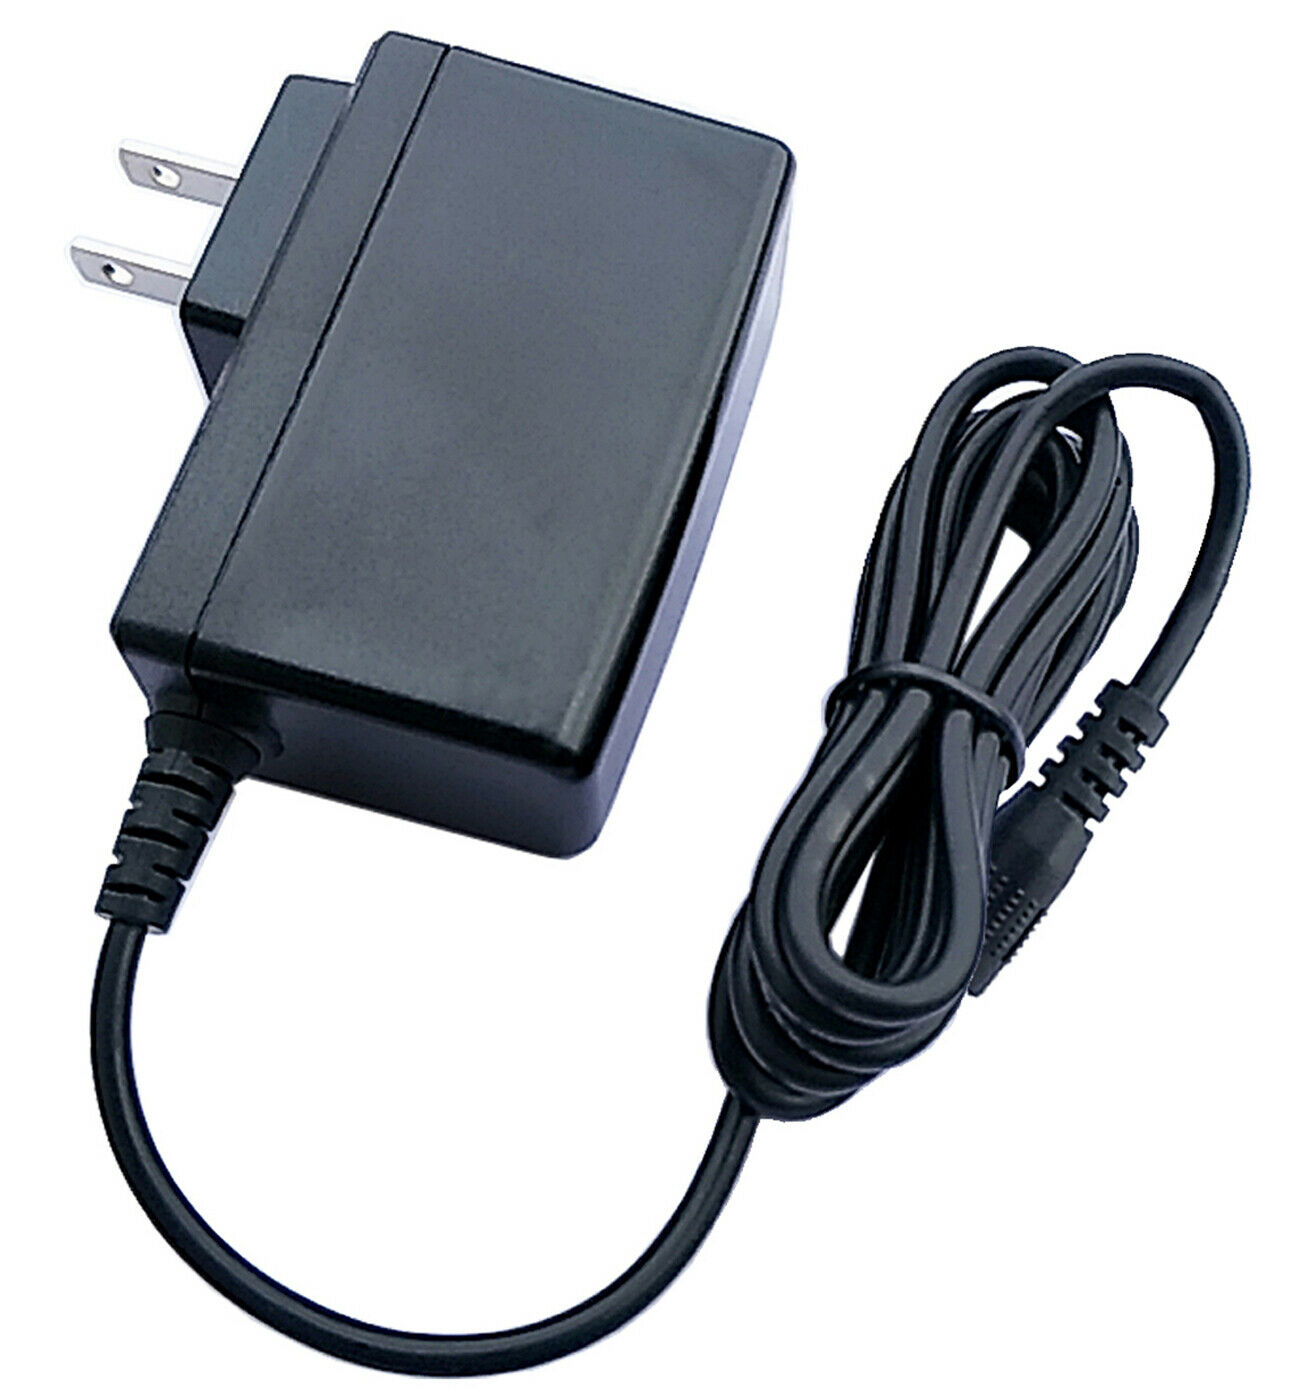 AC Adapter For Troy-Bilt Cordless Trimmer JumpStart Engine Starter Power Charger Type: AC/DC Adapter Features: Powere